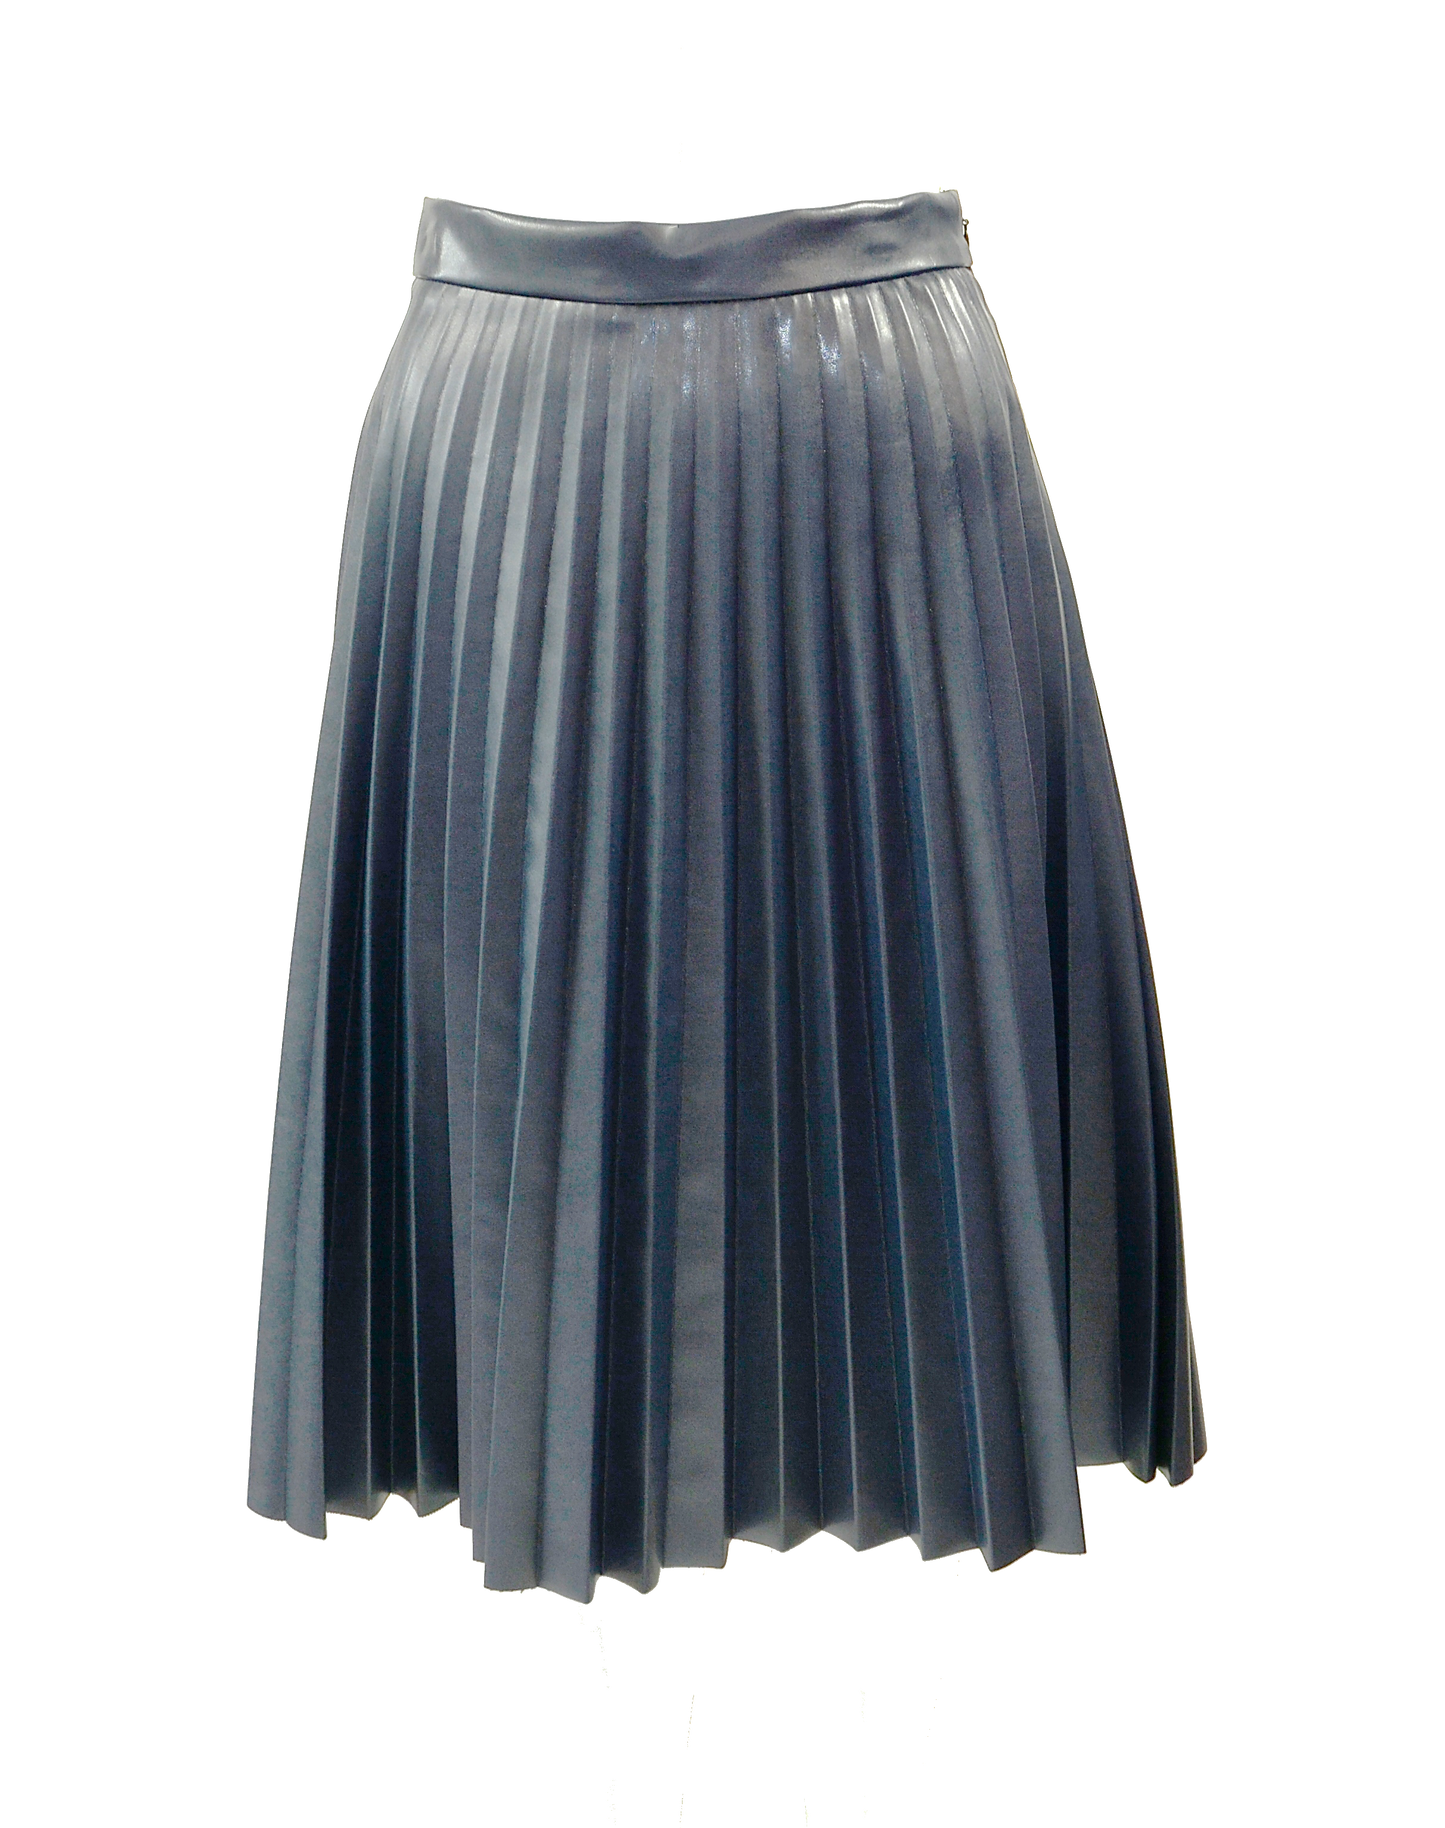 Pleated skirt made of imitation leather in anthracite grey